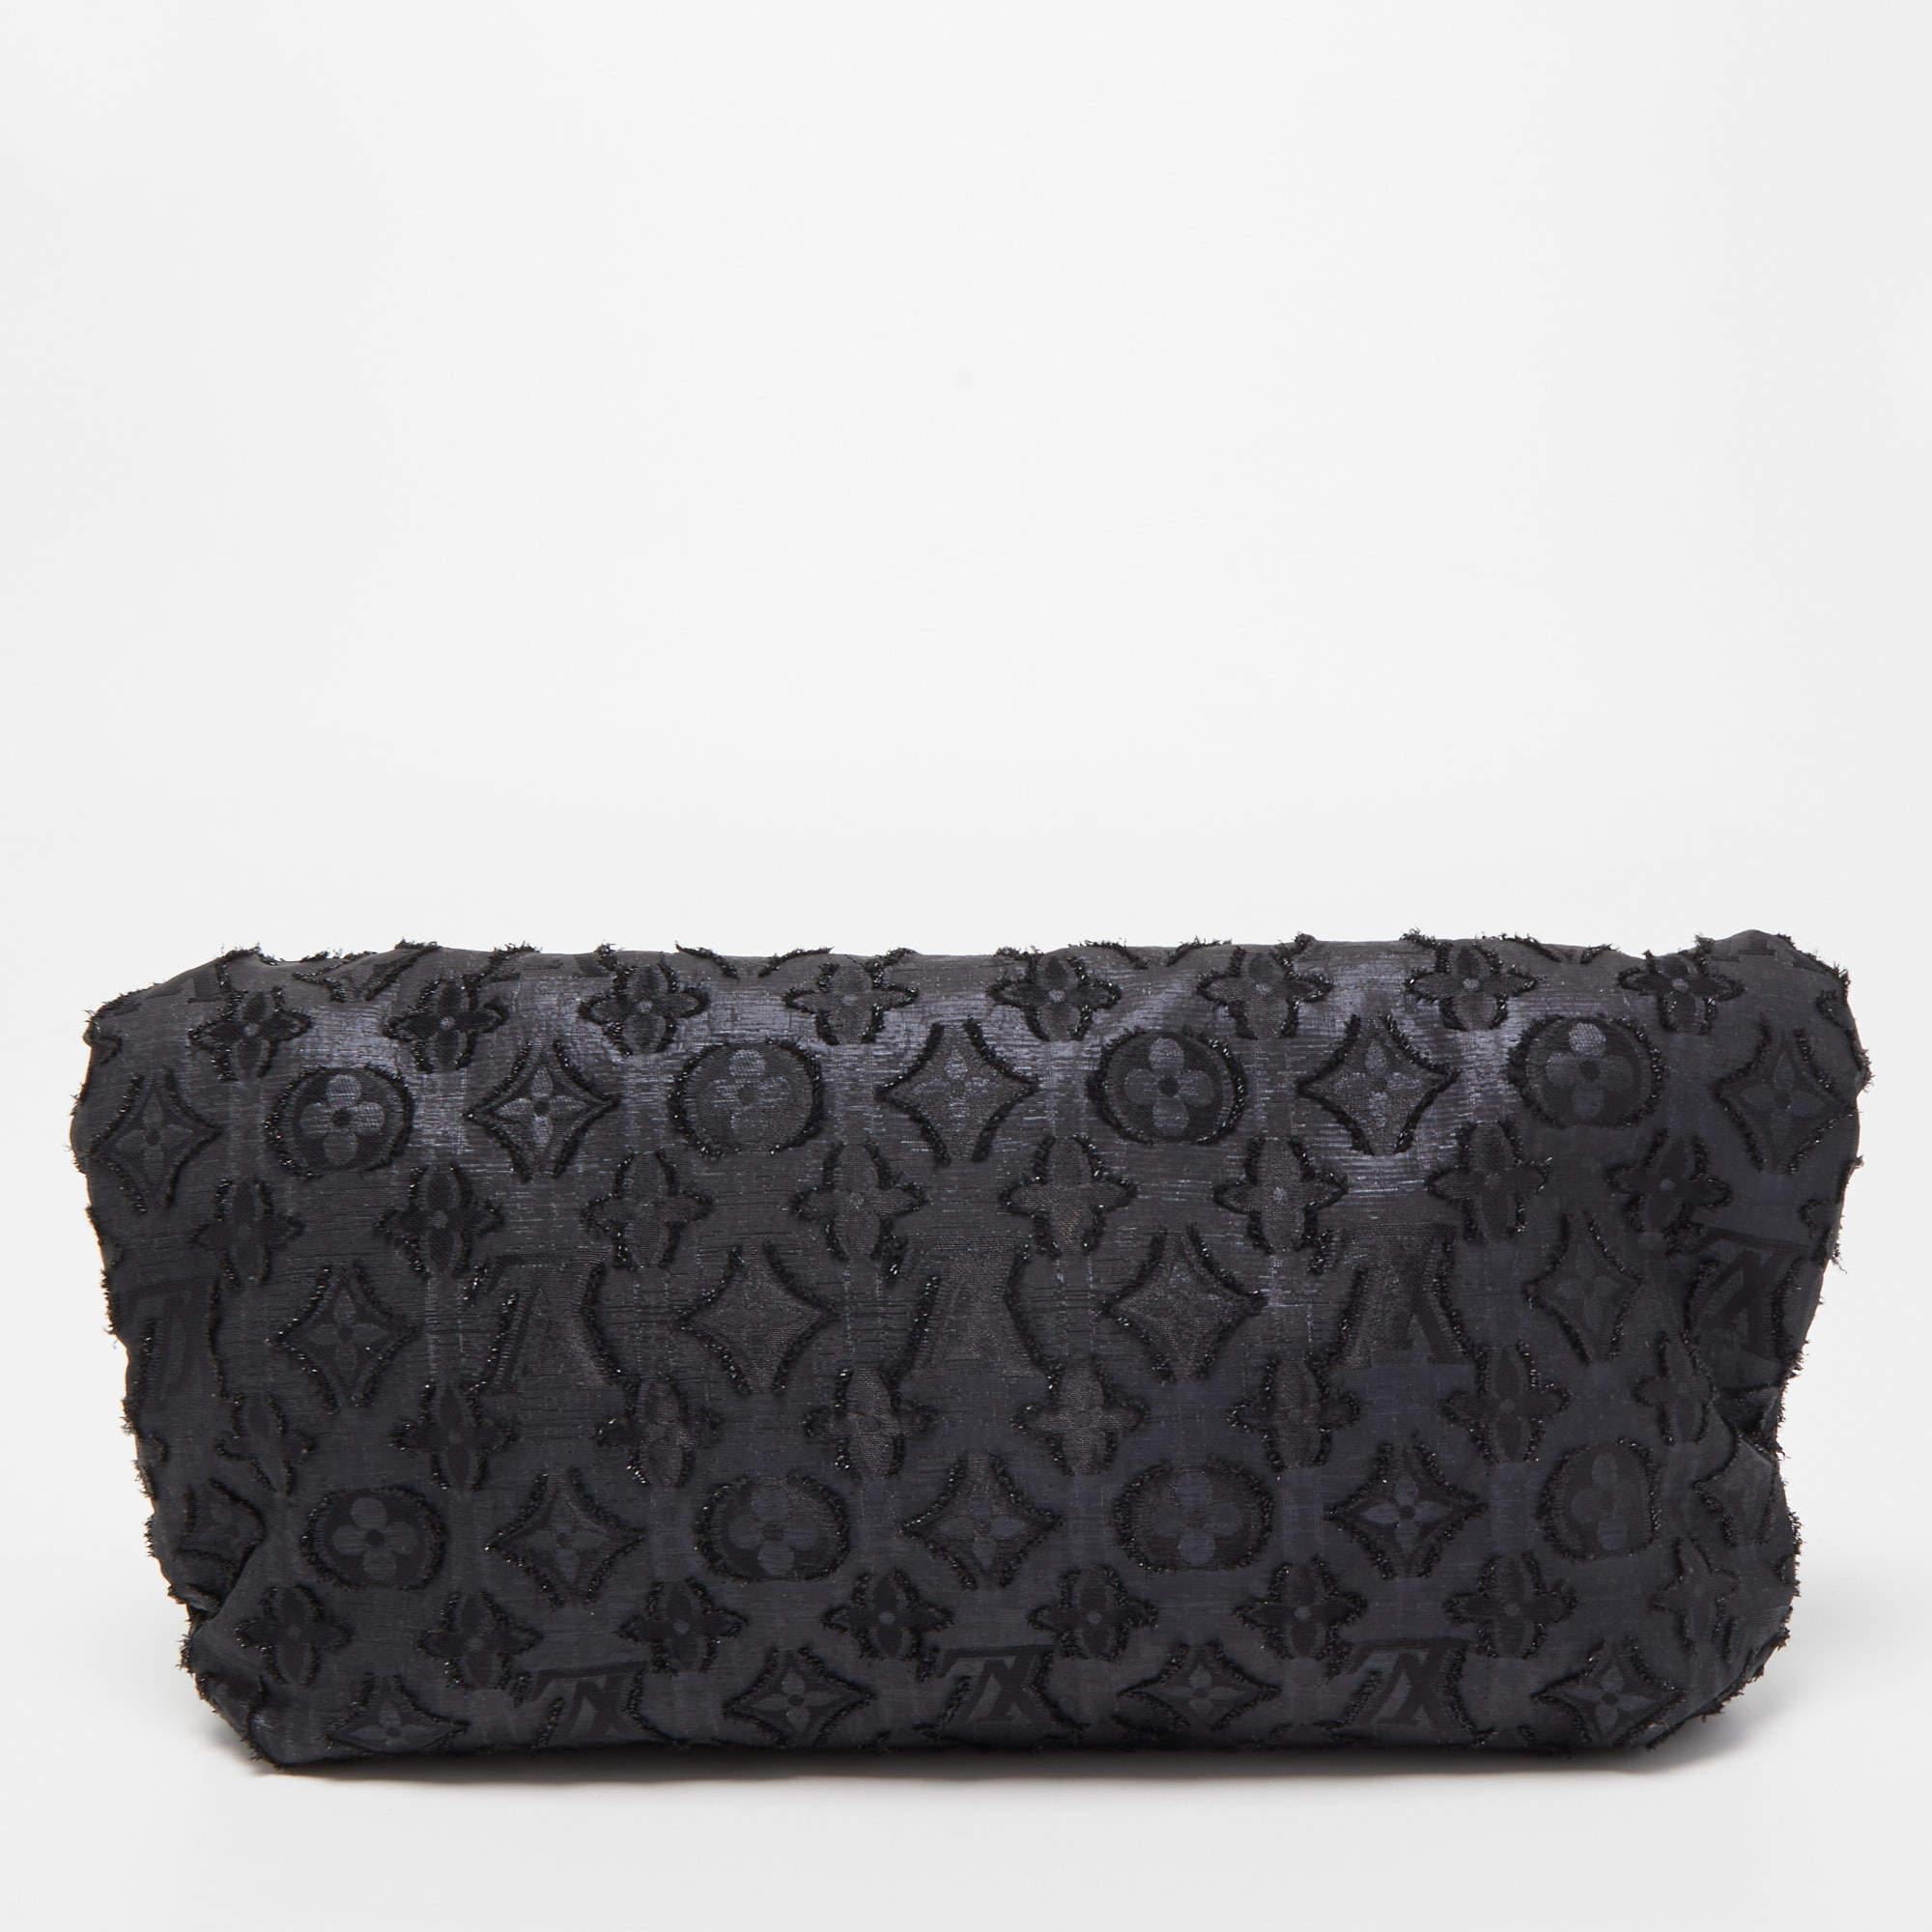 This clutch is just the right accessory to compliment your chic ensemble. It comes crafted in quality material featuring a well-sized interior that can comfortably hold all your little essentials.

Includes: Pocket Mirror